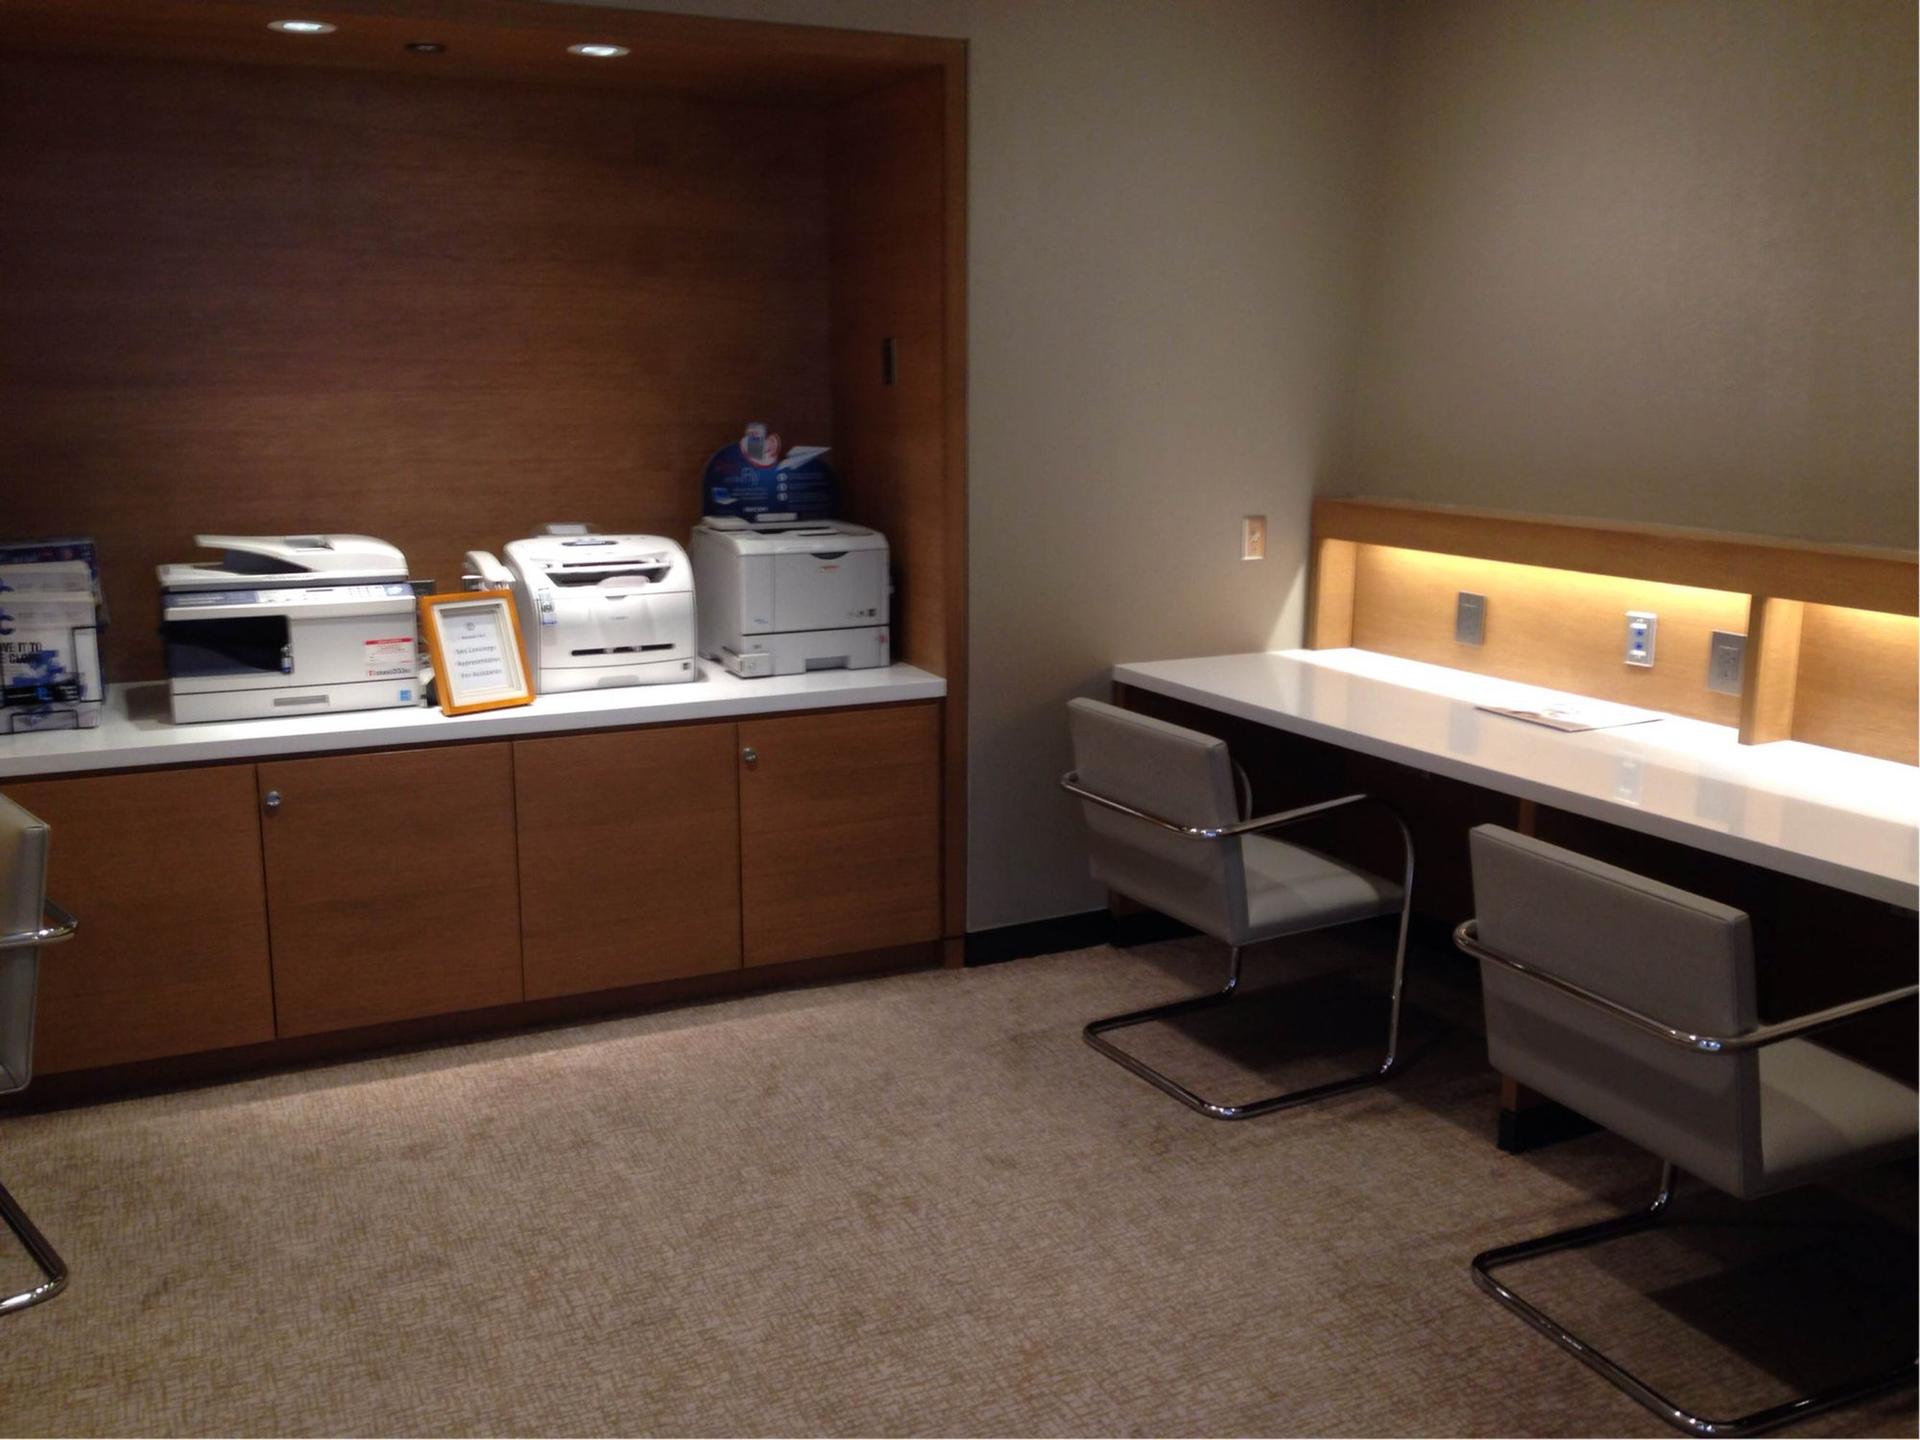 American Airlines Admirals Club image 20 of 50